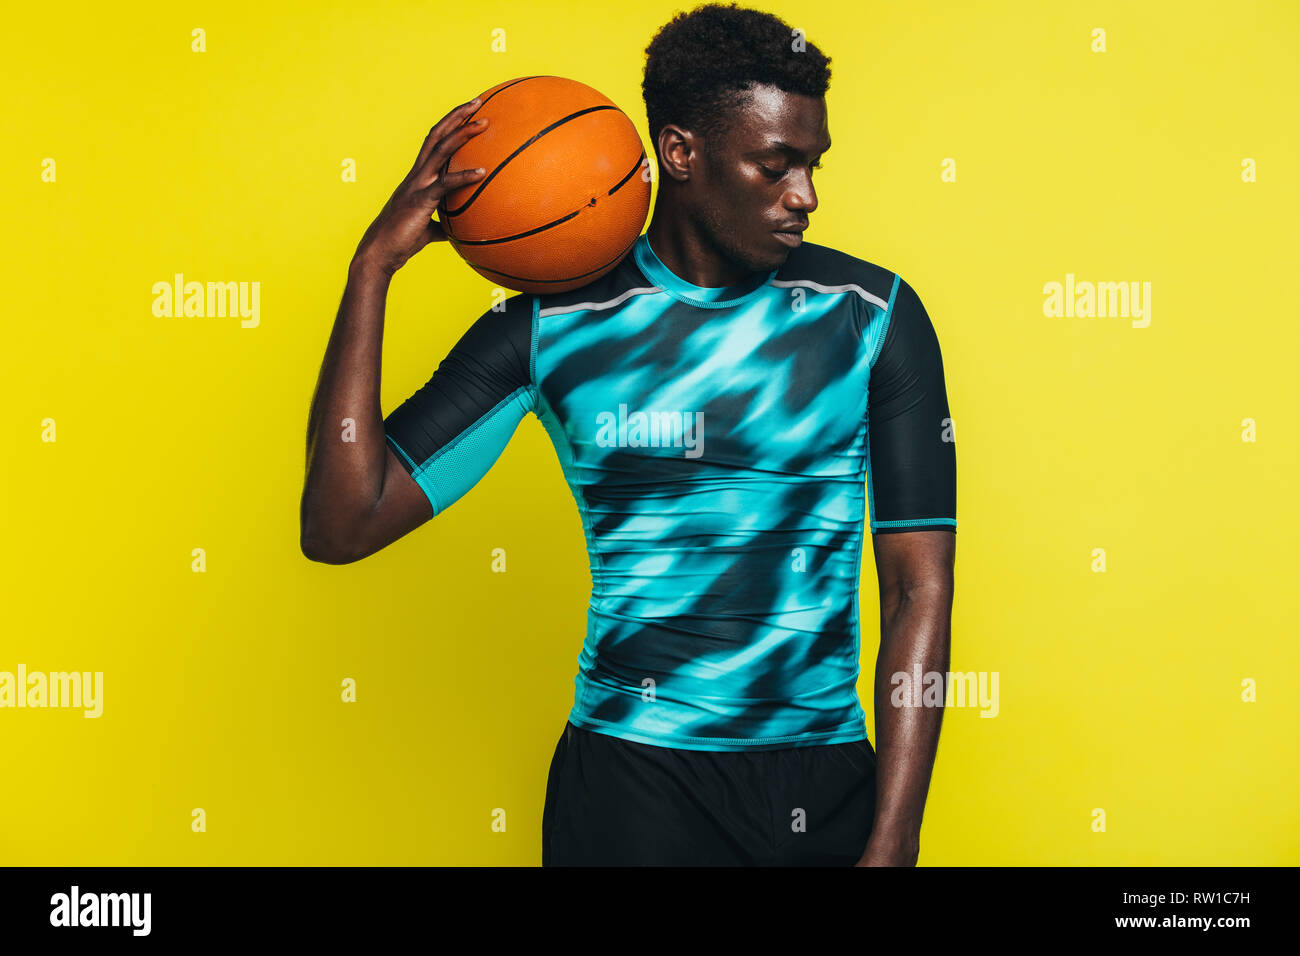 African man with basketball on his shoulder. Male basketball player against yellow background. Stock Photo